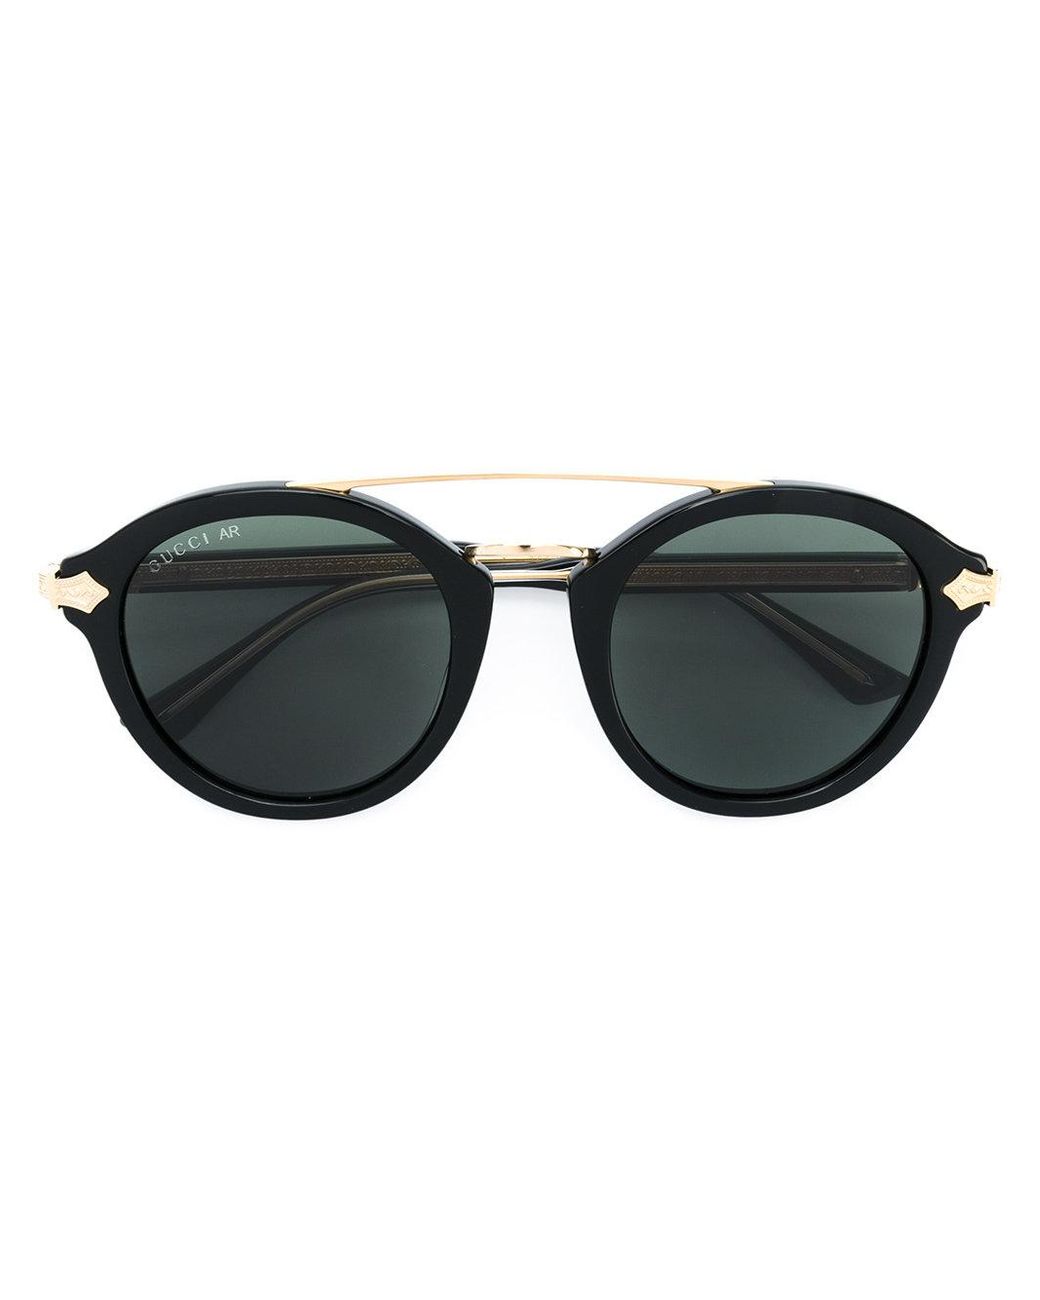 Gucci Japan Special Collection Sunglasses in Black | Lyst